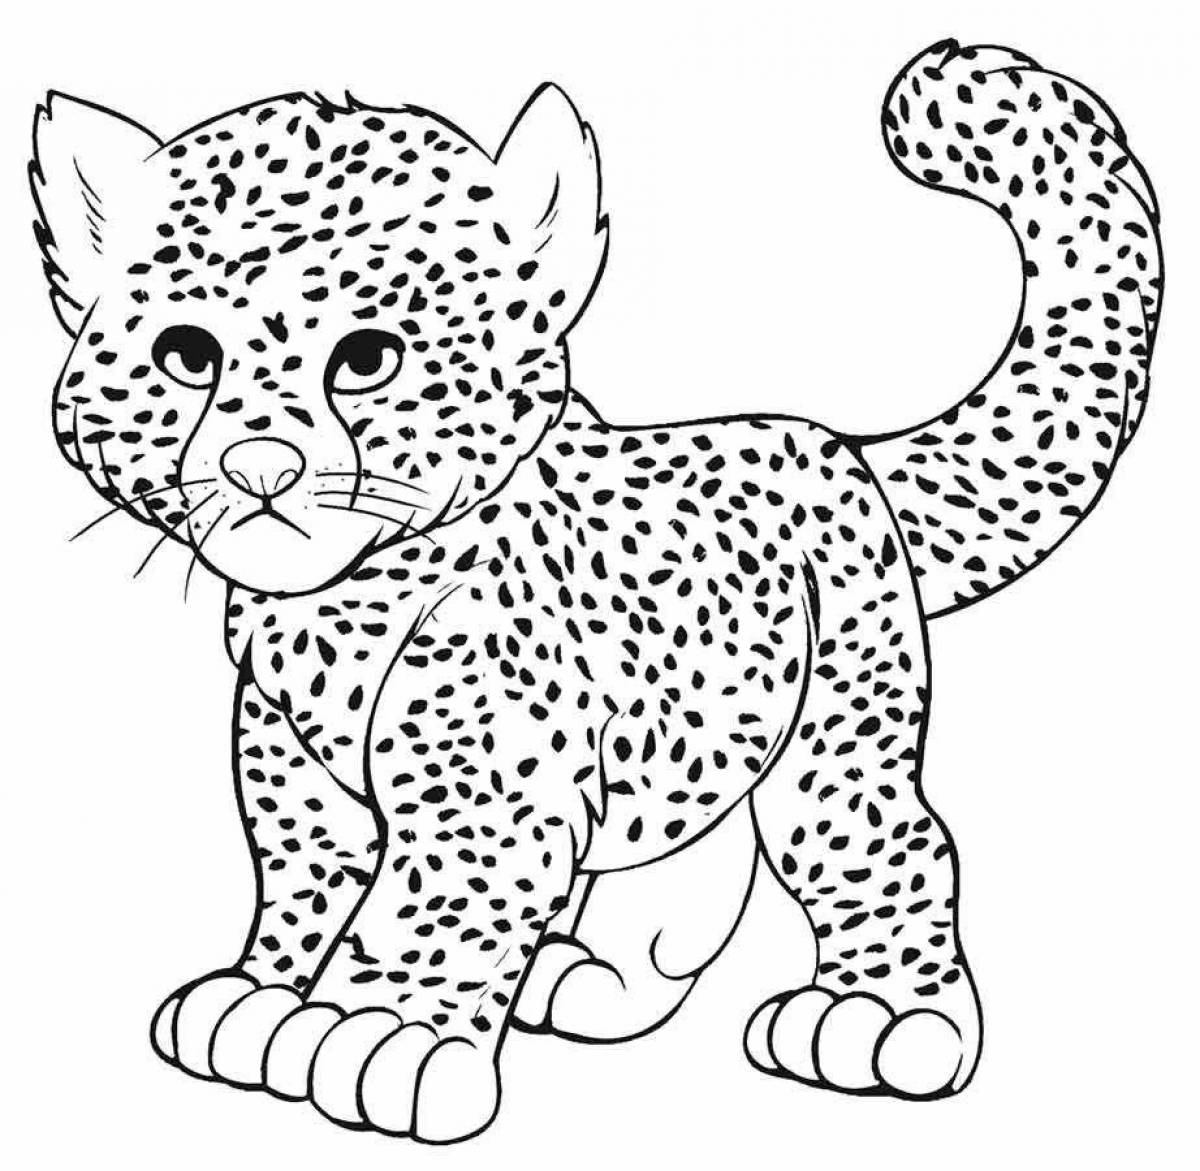 Great animal coloring book for teens